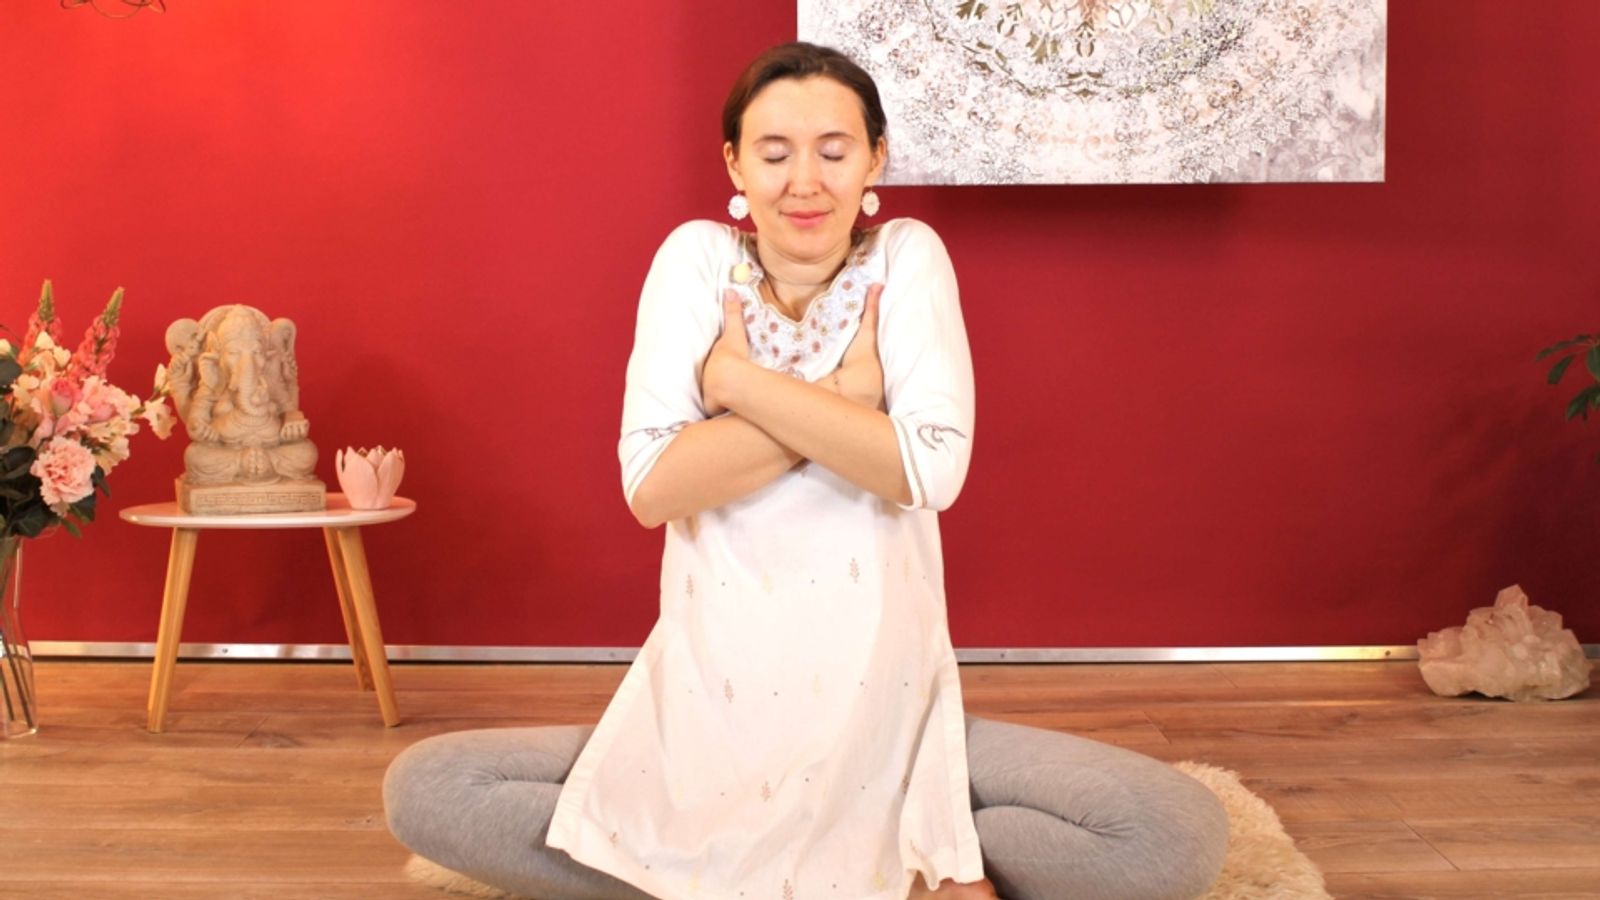 3 Meditations - For hard stomach, stress and nervousness